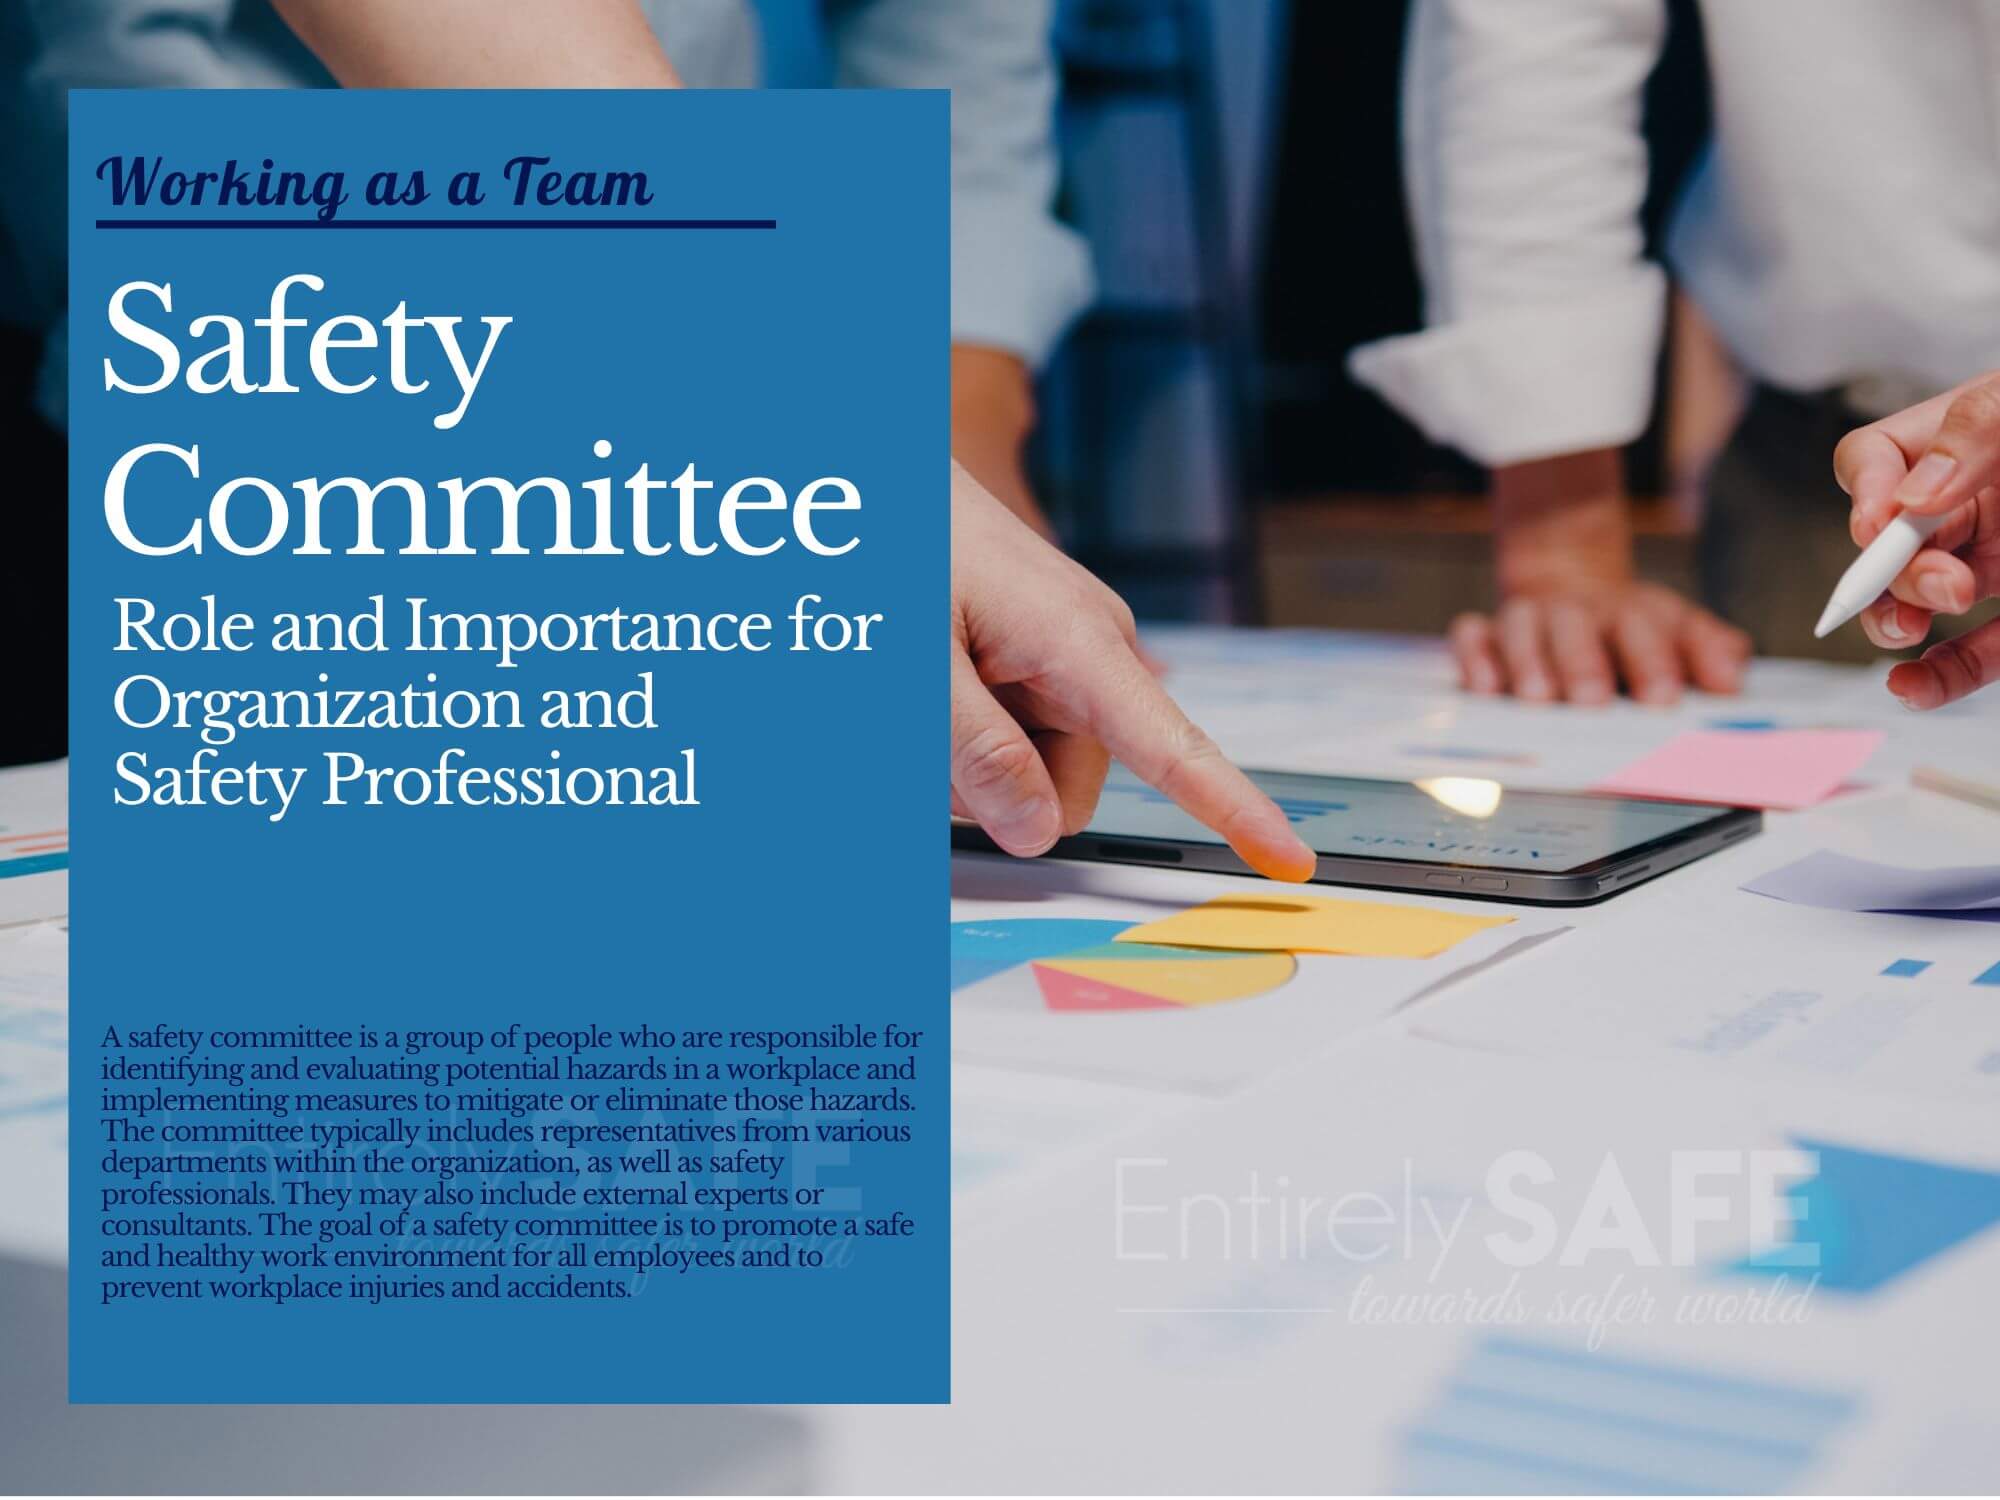 Safety Comittee - Role and Importance for Organization and Safety Prefessionals